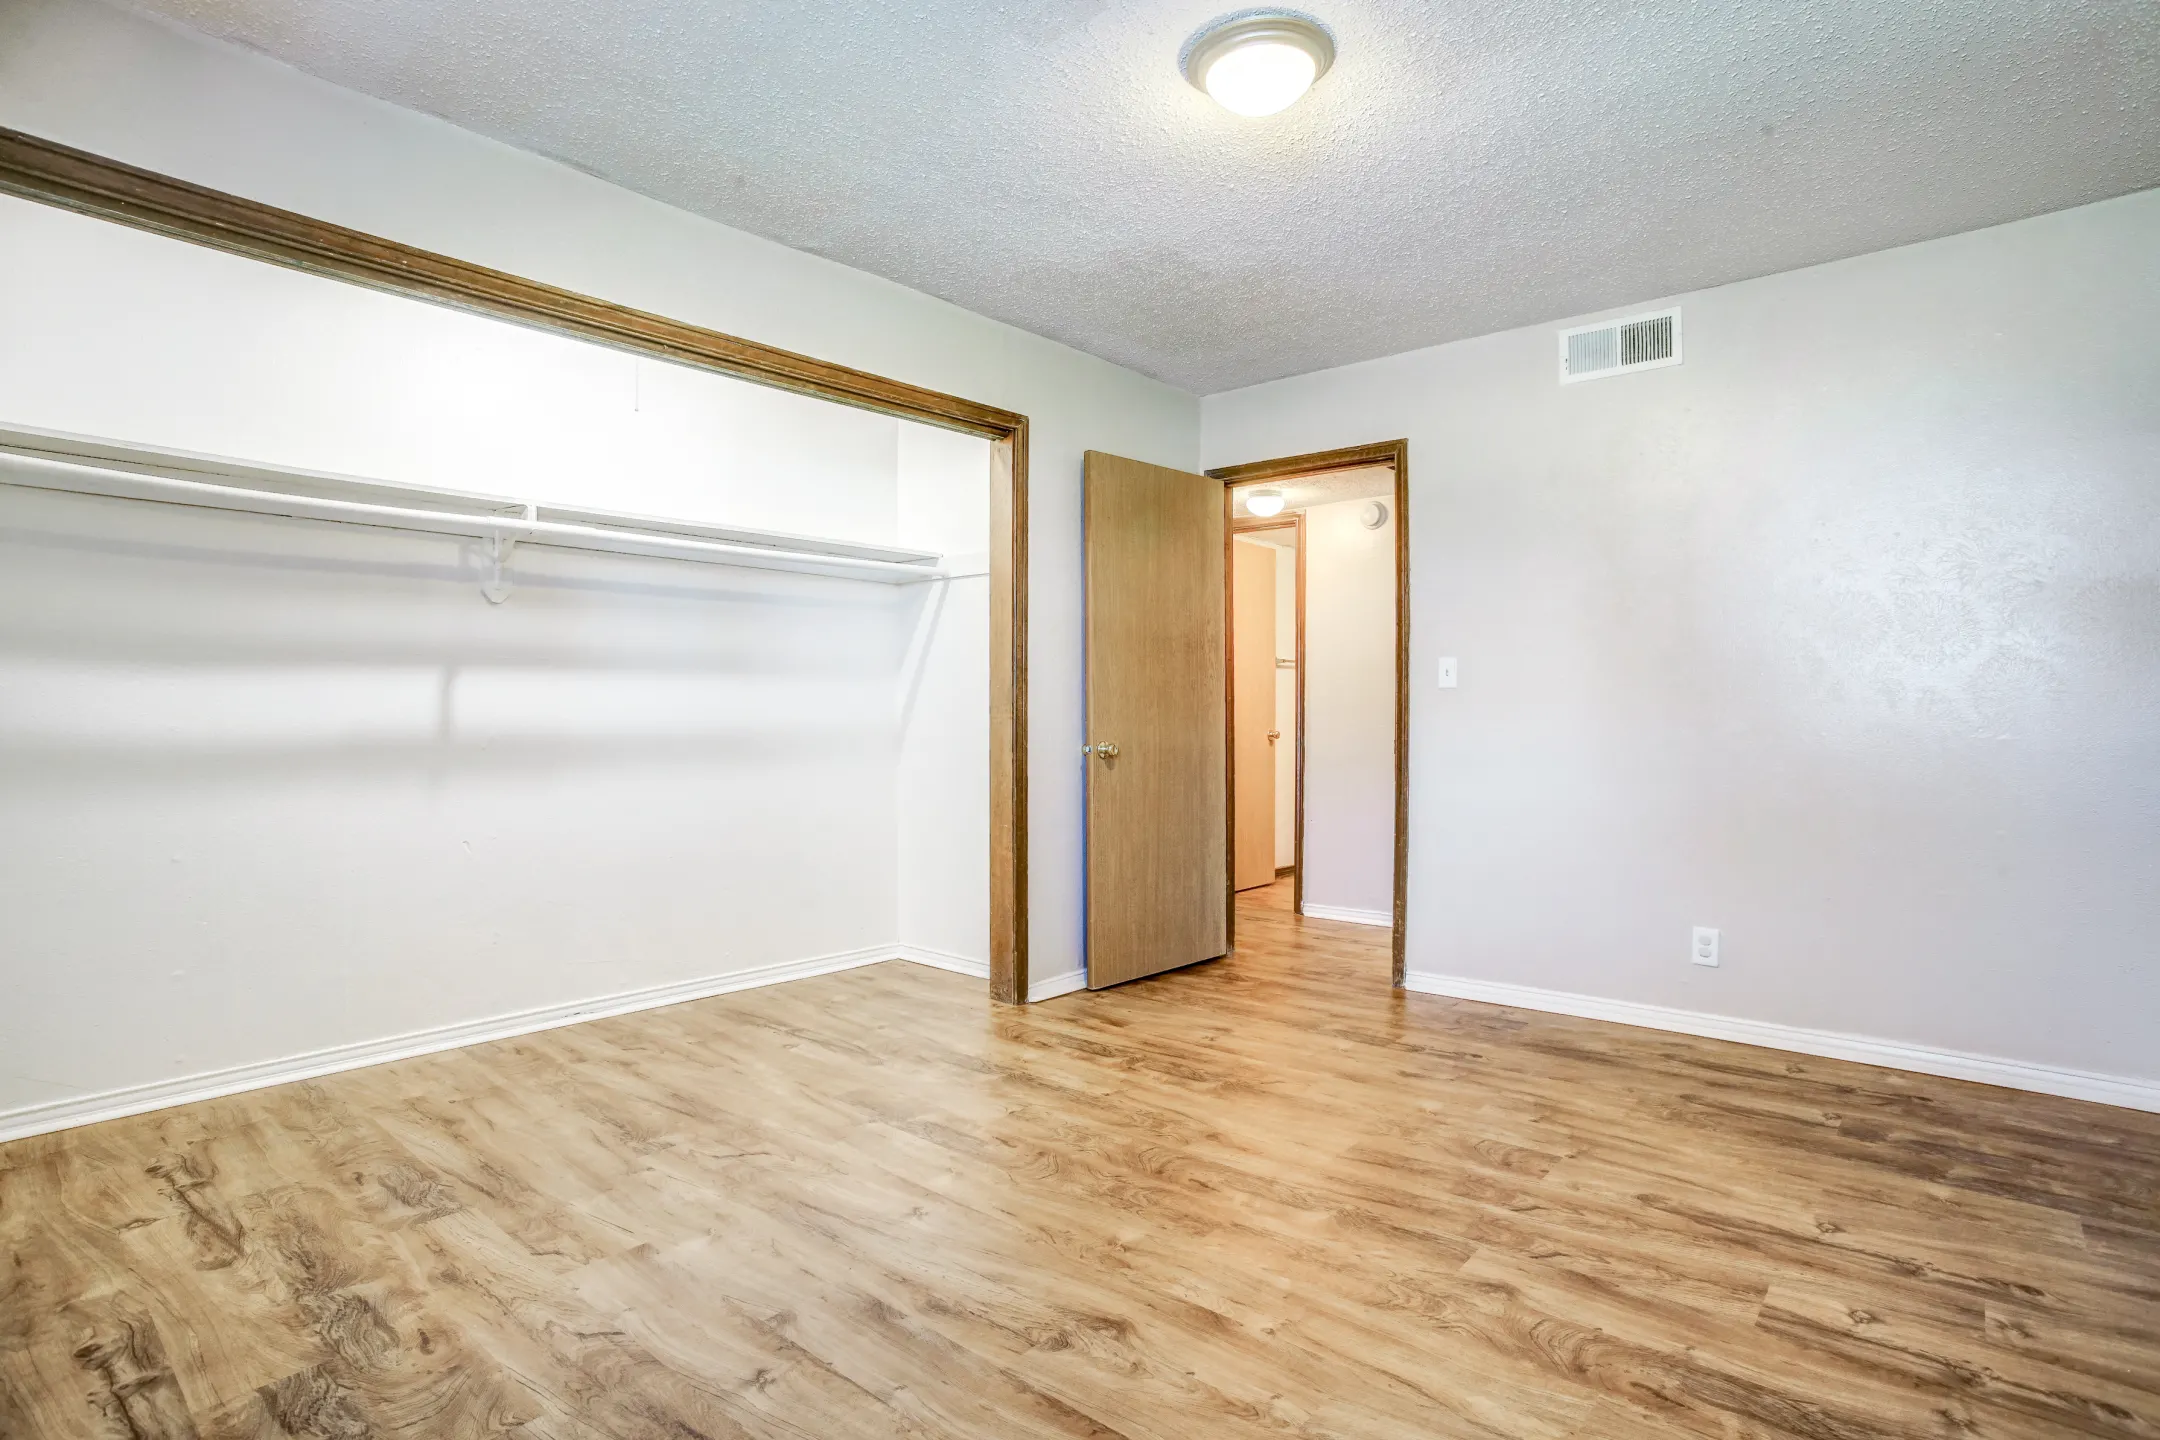 Bedroom - Turnberry Apartments - Norman, OK